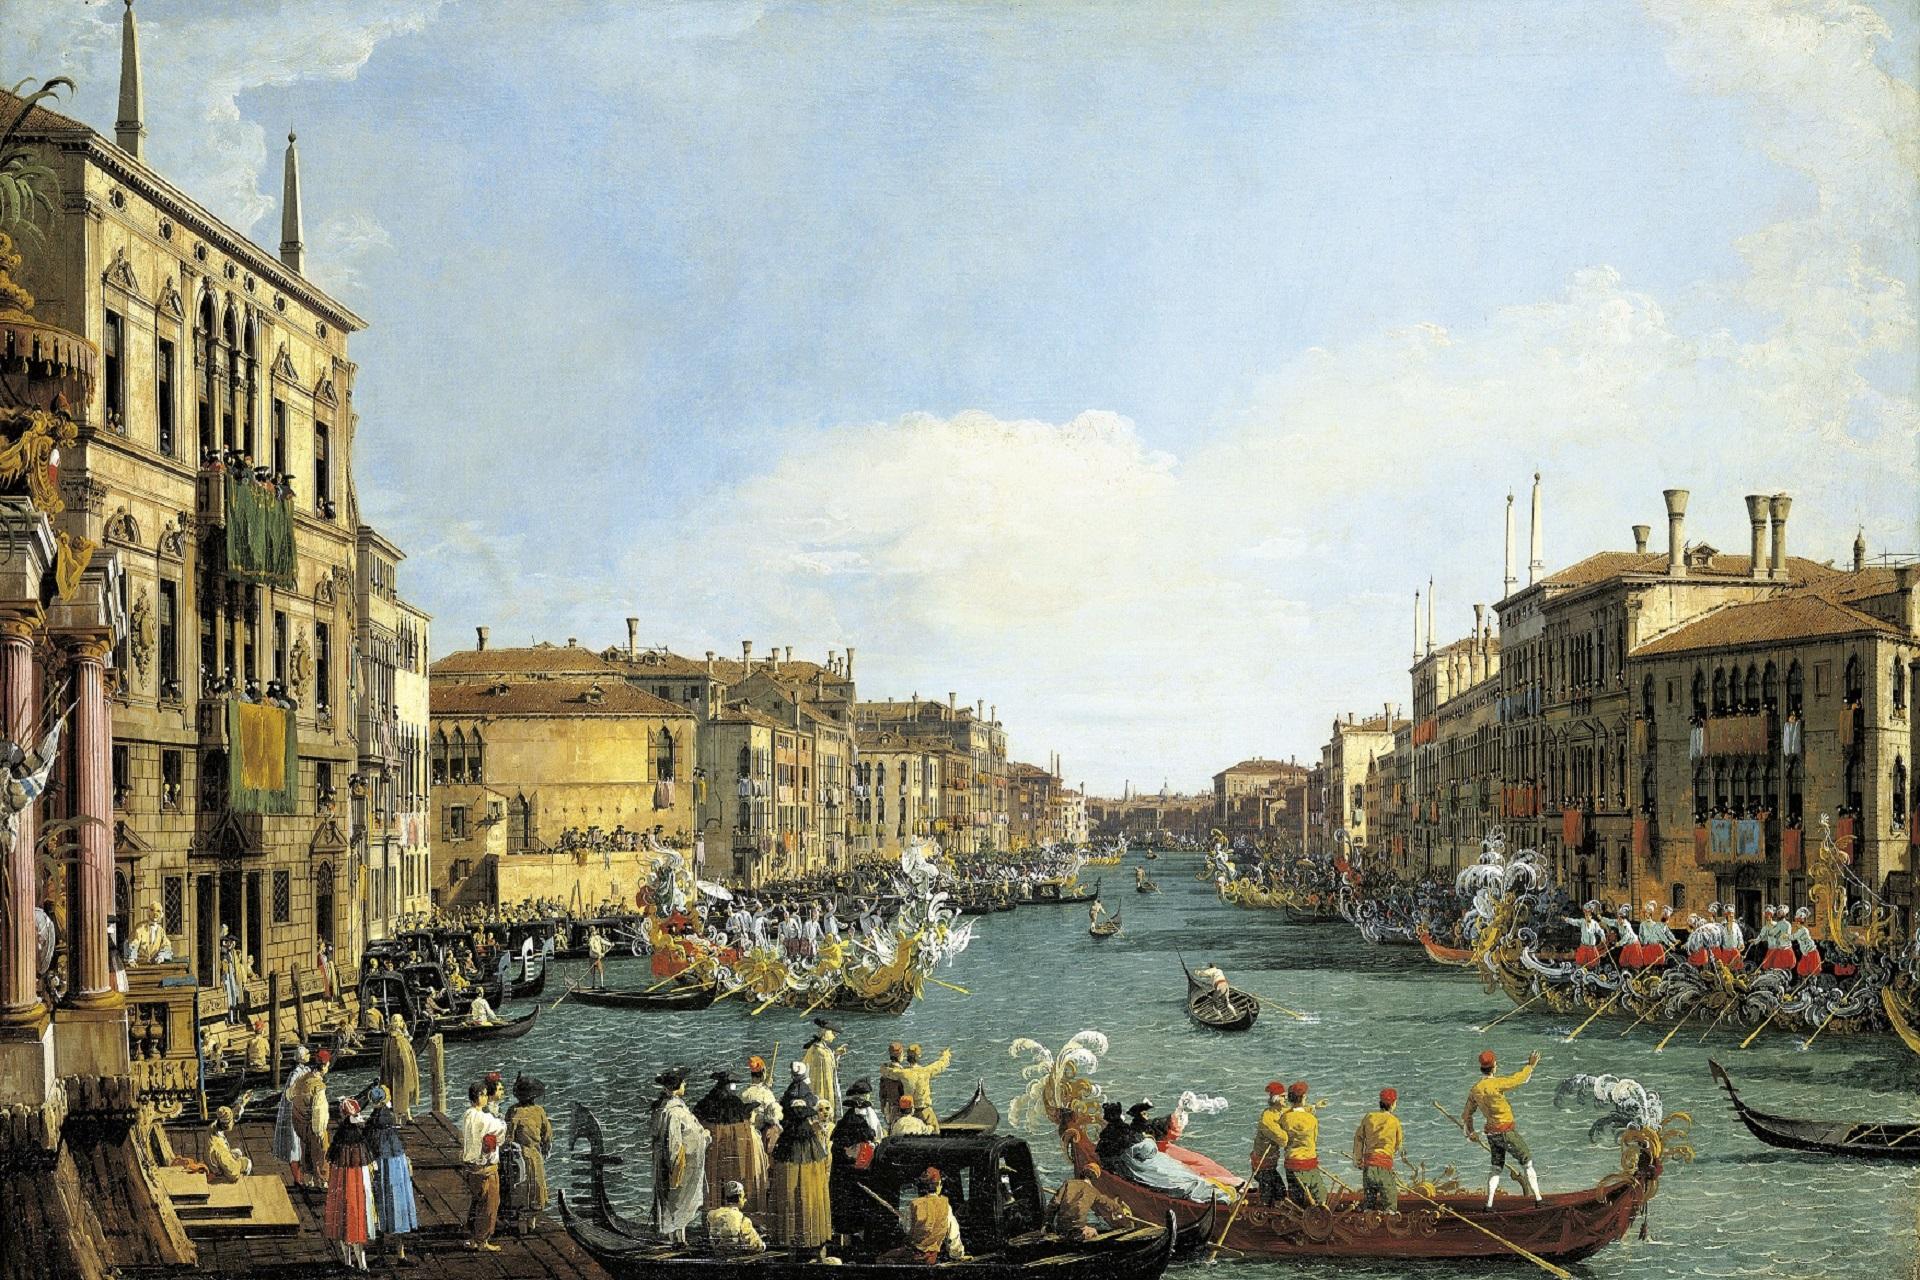 A painting of a Venice canal scene. There are buildings lining the canal and lots of boats on the water